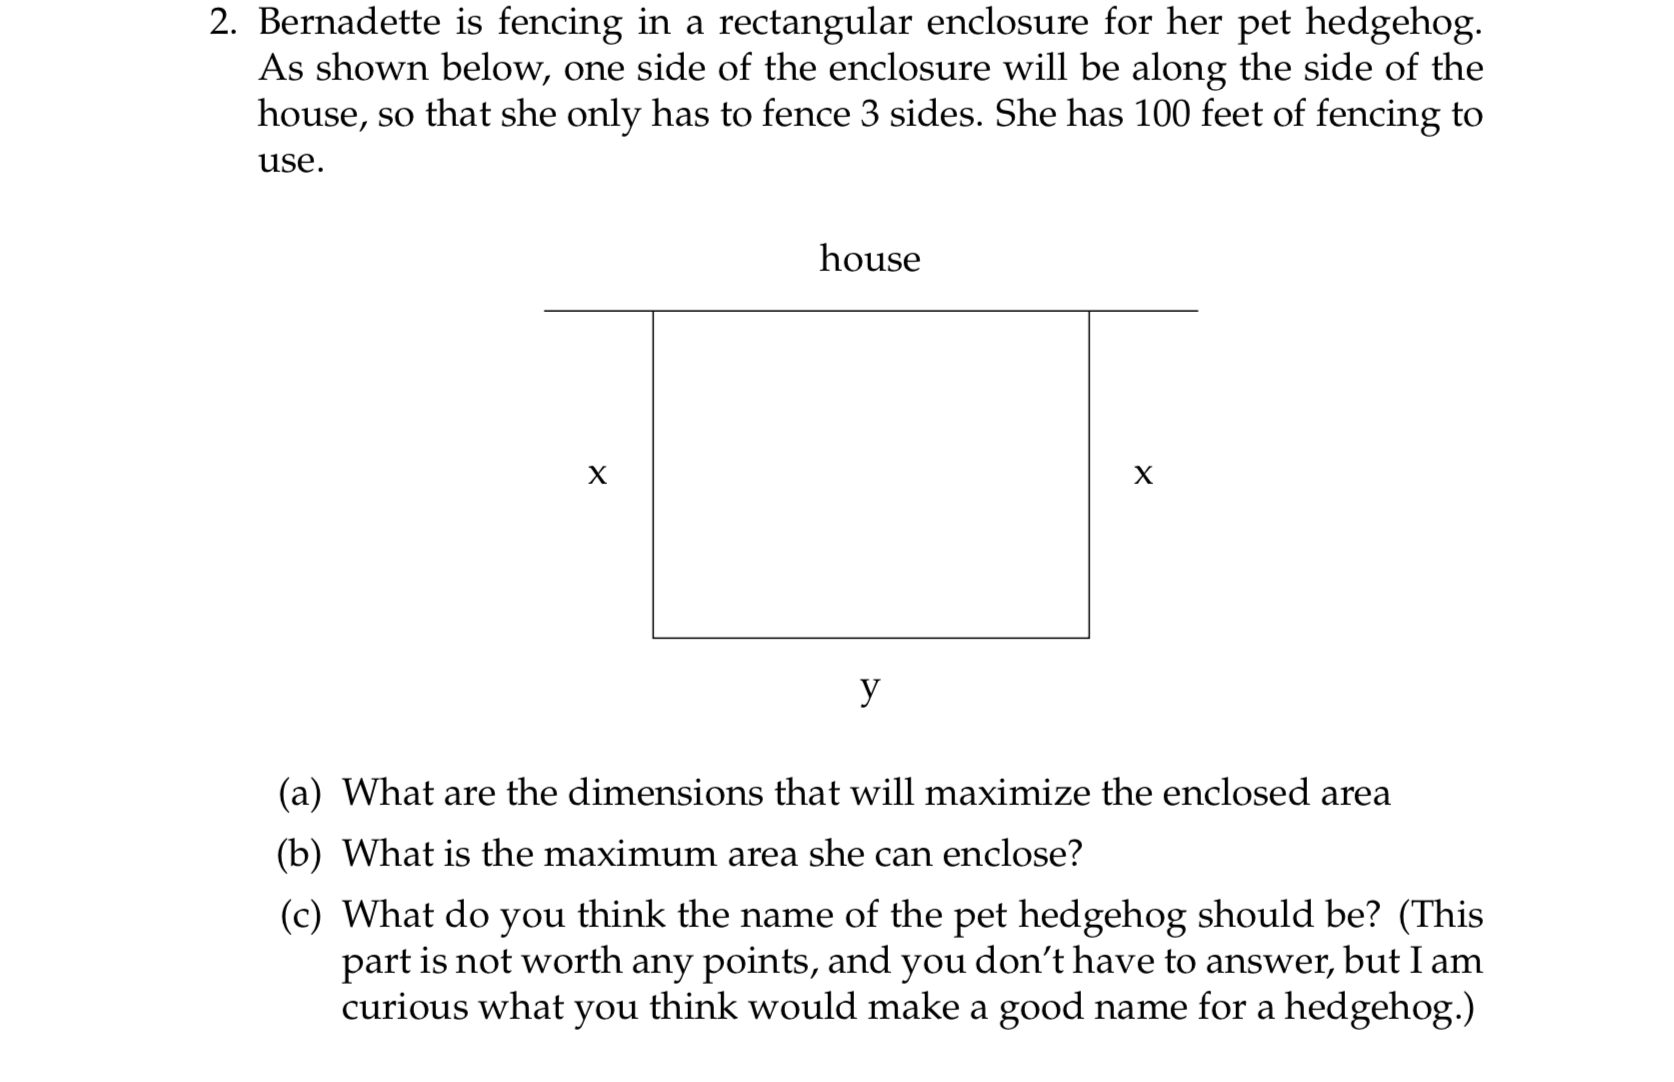 2. Bernadette is fencing in a rectangular enclosure for her pet hedgehog.
As shown below, one side of the enclosure will be along the side of the
house, so that she only has to fence 3 sides. She has 100 feet of fencing to
use.
house
X
X
y
(a) What are the dimensions that will maximize the enclosed area
(b) What is the maximum area she can enclose?
(c) What do you think the name of the pet hedgehog should be? (This
part is not worth any points, and you don't have to answer, but I am
curious what you think would make a good name for a hedgehog.)
